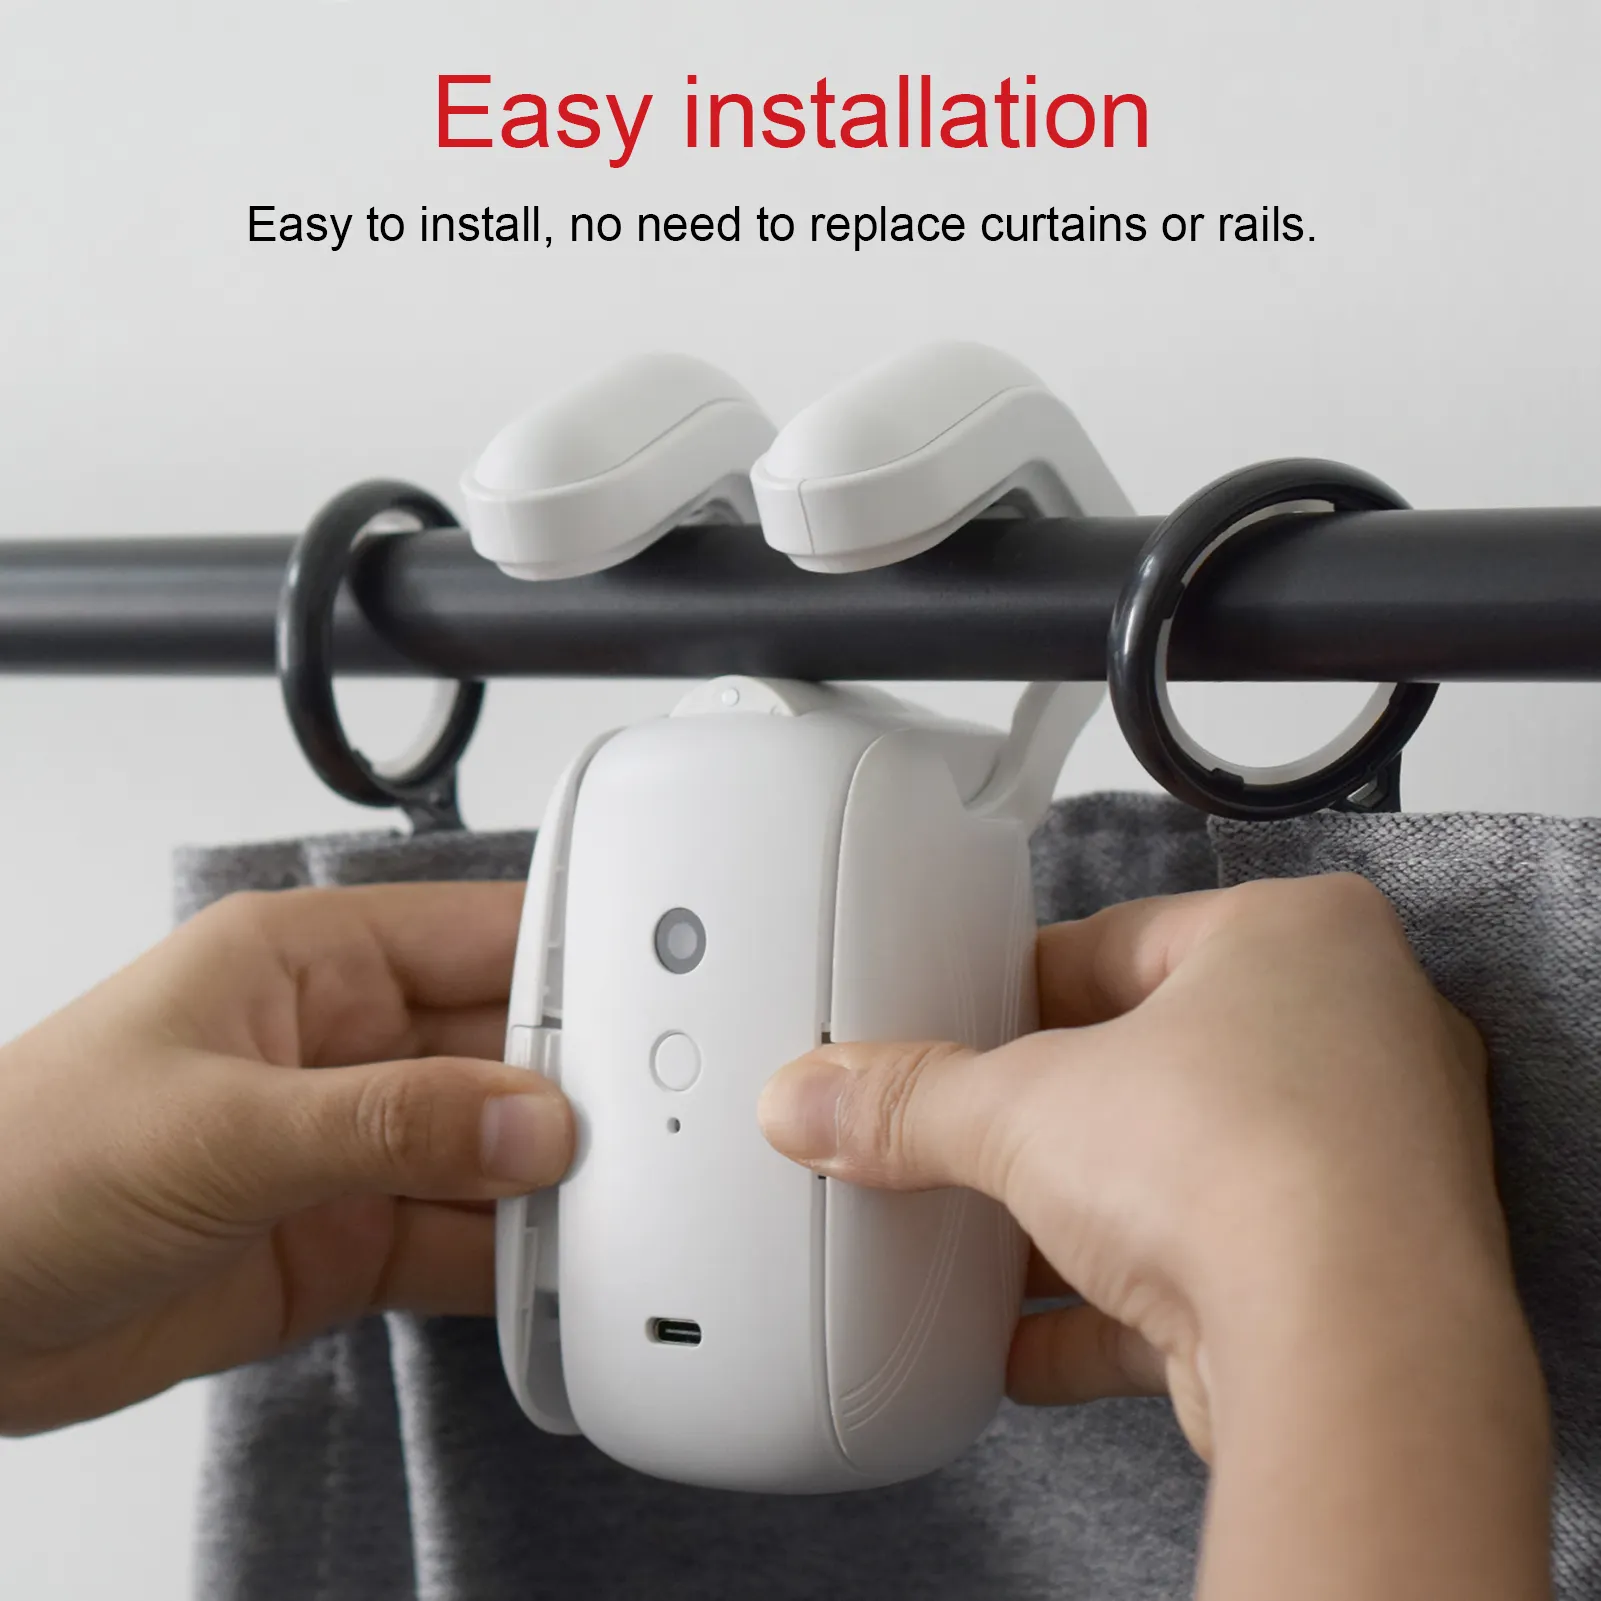 Tuya No External Power Required Smart Curtain Driver For Home Bedroom Hotel Easy Carry Curtain Robot Opener automatic Curtain